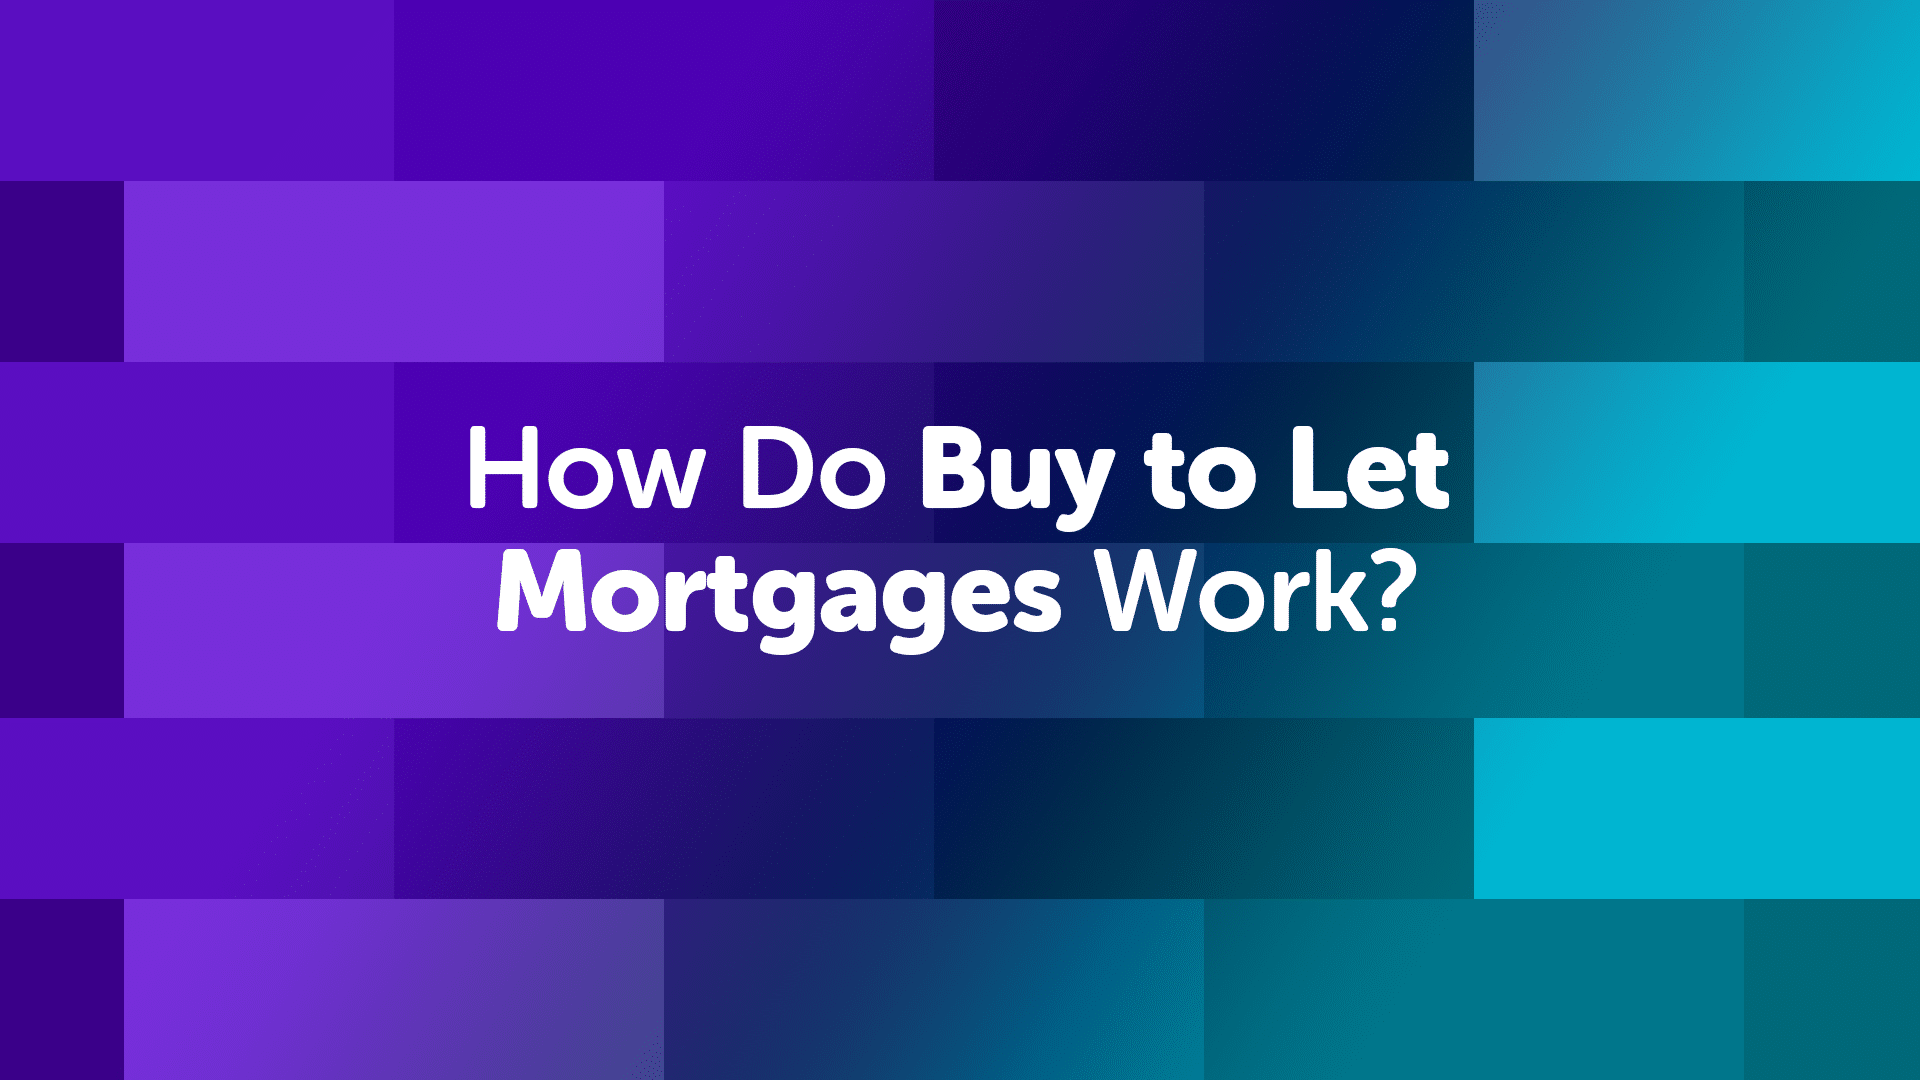 How Do Buy to Let Mortgages Work